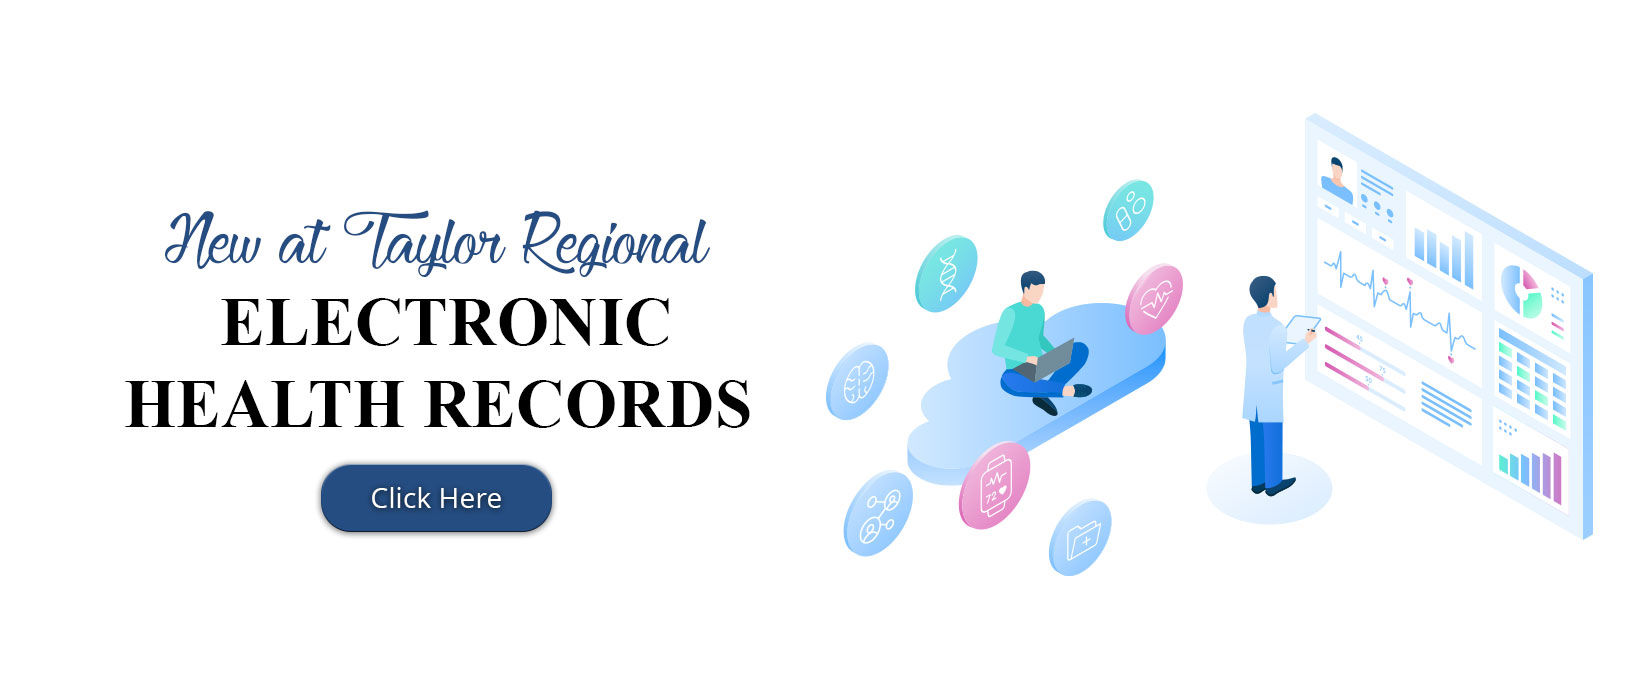 New at Taylor Regional
Electronic Health Records
Click Here to Learn More